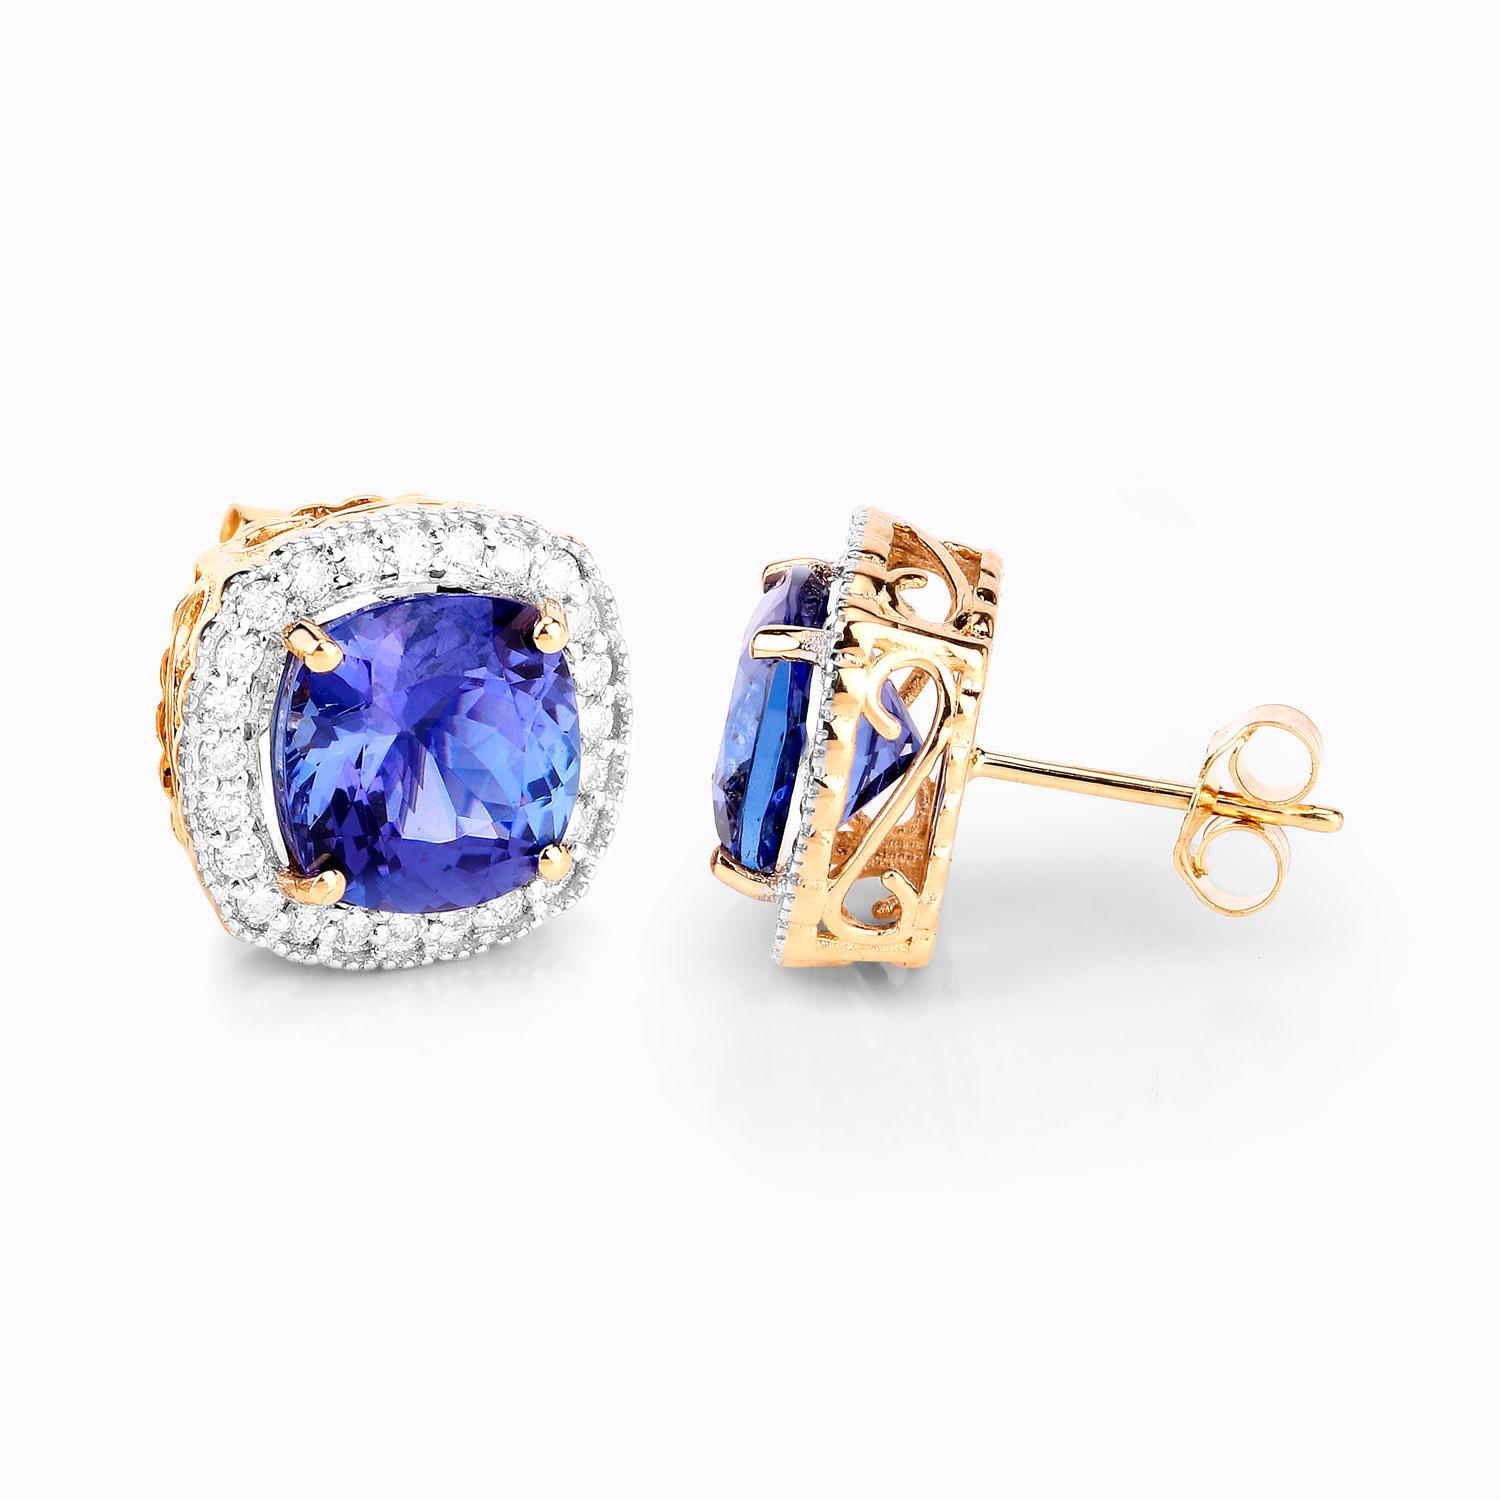 Cushion Cut Tanzanite Stud Earrings Diamond Halo 6 Carats 14K Gold In Excellent Condition For Sale In Laguna Niguel, CA